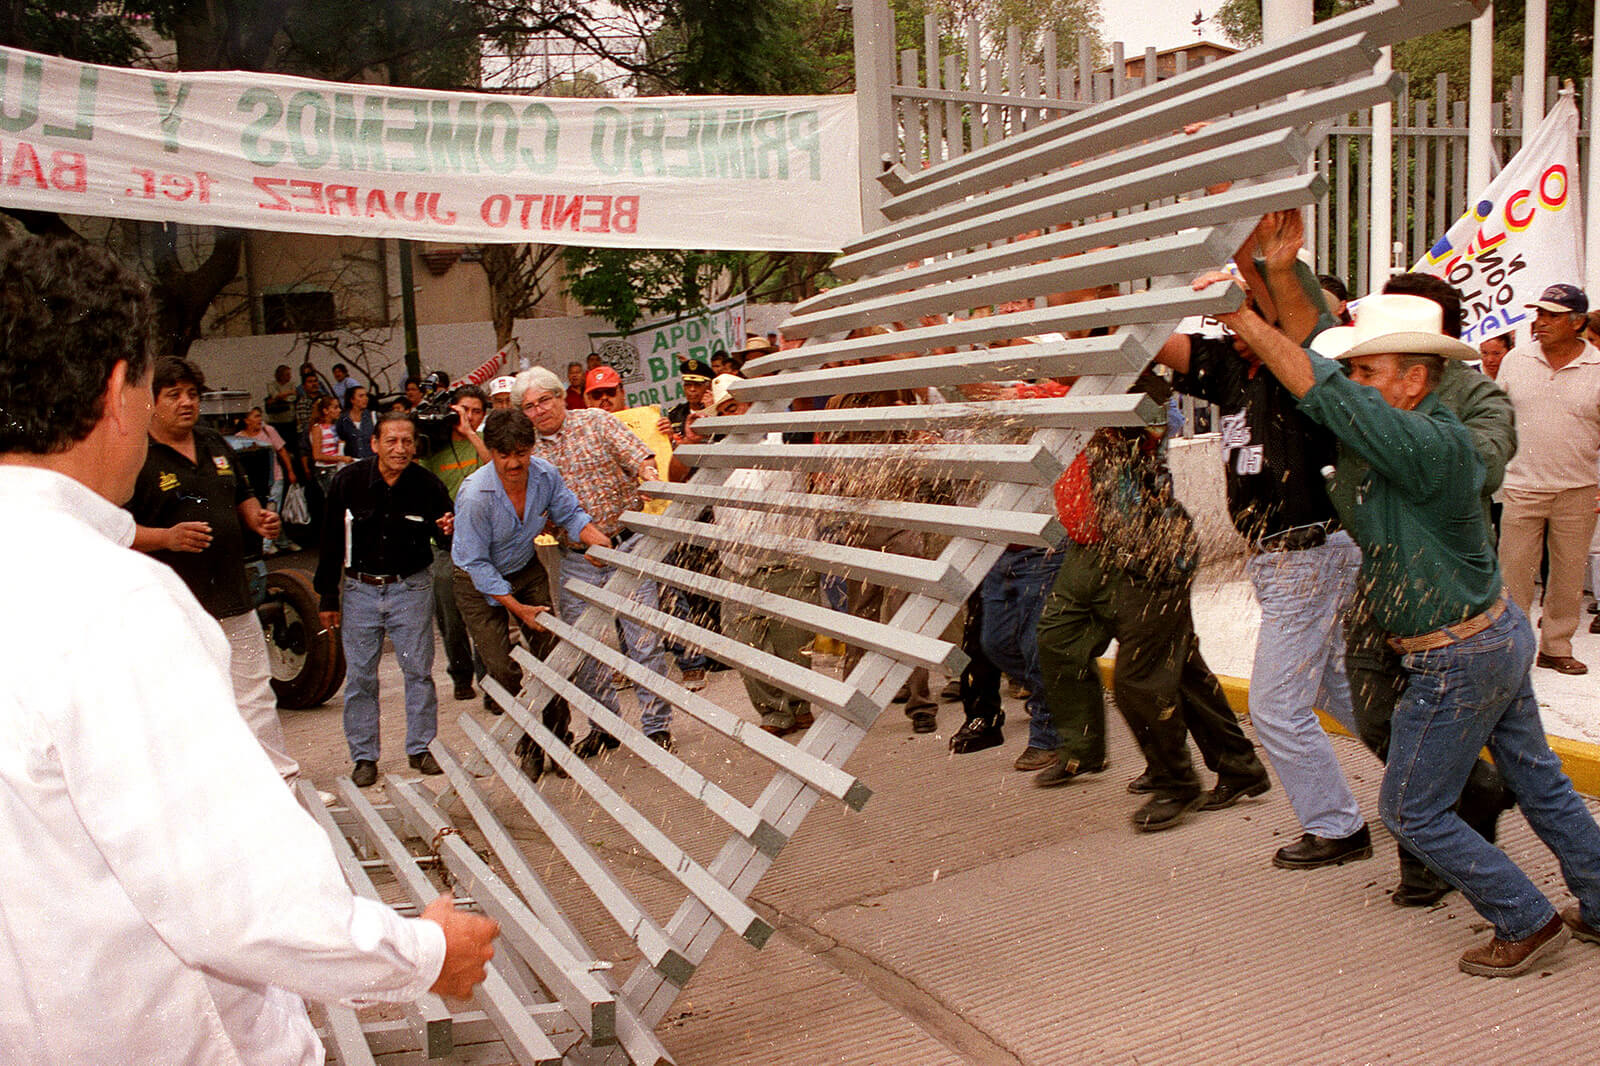 Farmers break the gate of the Economy Ministry during a protest against NAFTA agreement which they say affect the price of their products, Oct. 29, 2002, in Mexico City.Ismael Rojas | AP